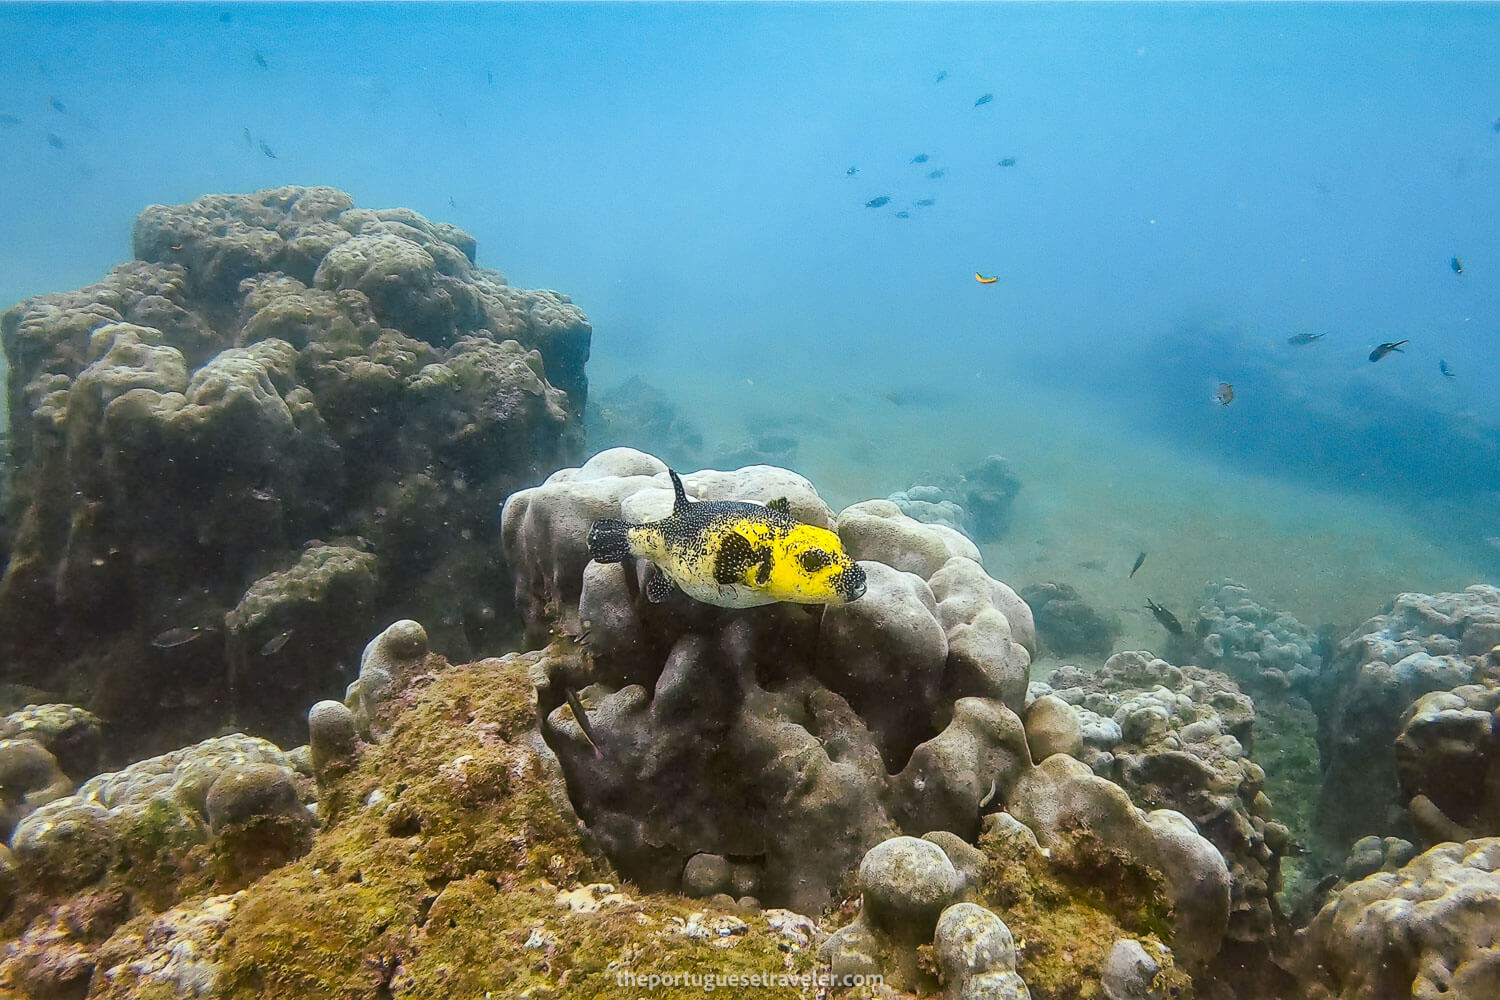 A yellow pufferfish on the first dive